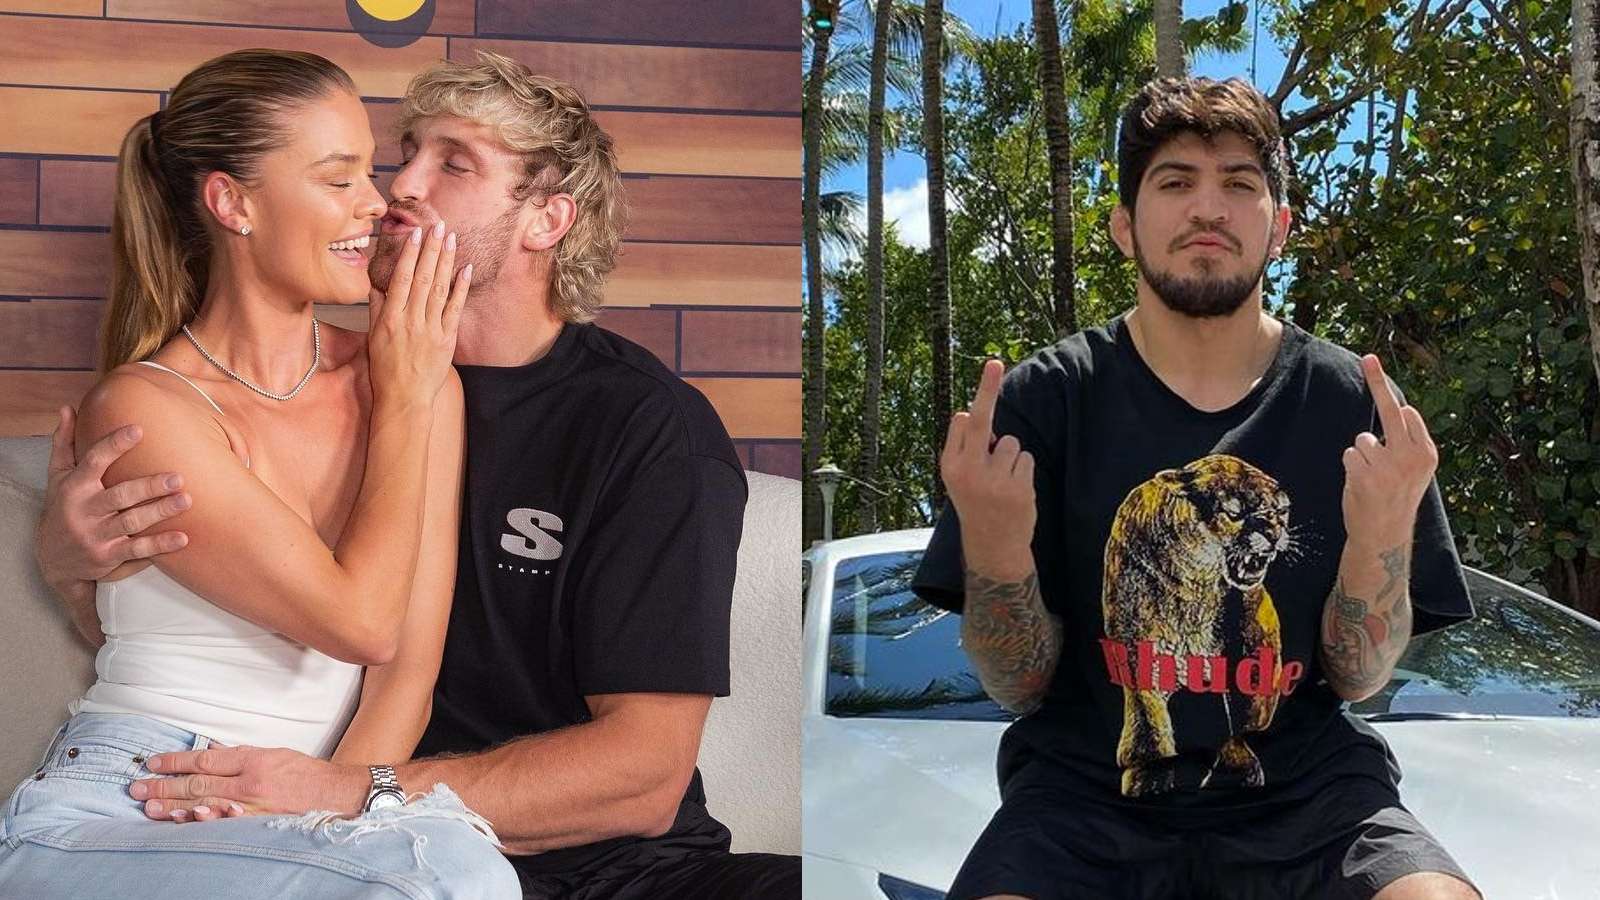 Logan Paul with Nina Agdal on Impaulsive, next to picture of Dillon Danis with middle fingers up